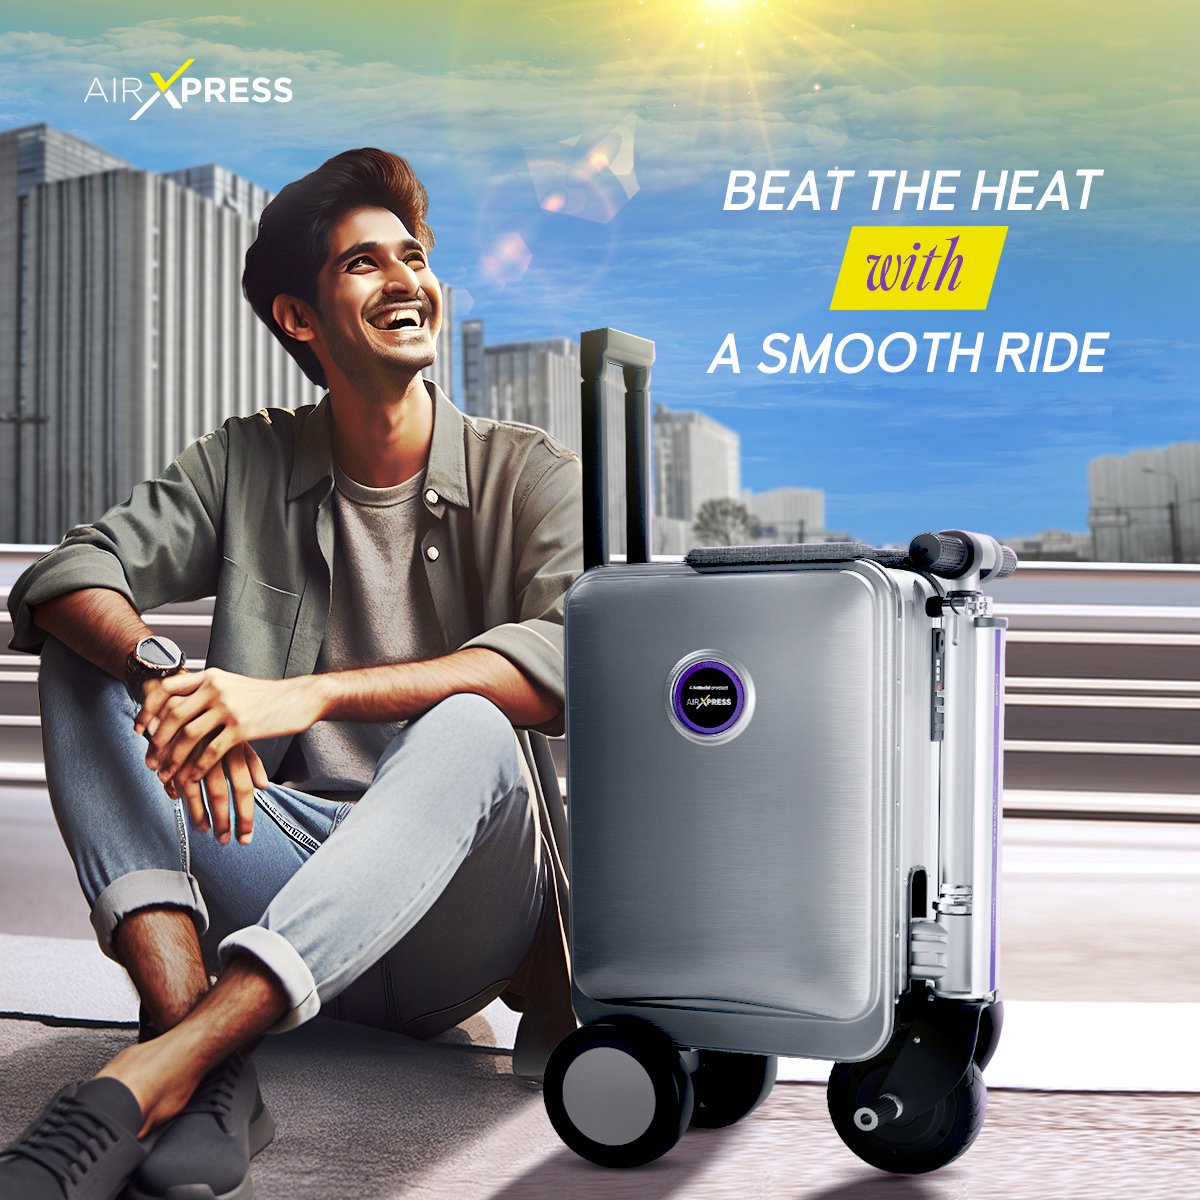 Beat the summer heat with the AirXpress Smart Riding Scooter! Travel becomes a breeze even on the hottest days. Slide into your summer adventures with AirXpress! #AirXpress #TravelWithAirXpress #Suitcase #Trolleybag #AirXpressByGoldmedal #Goldmedal #GoldmedalIndia #BeatTheHeat